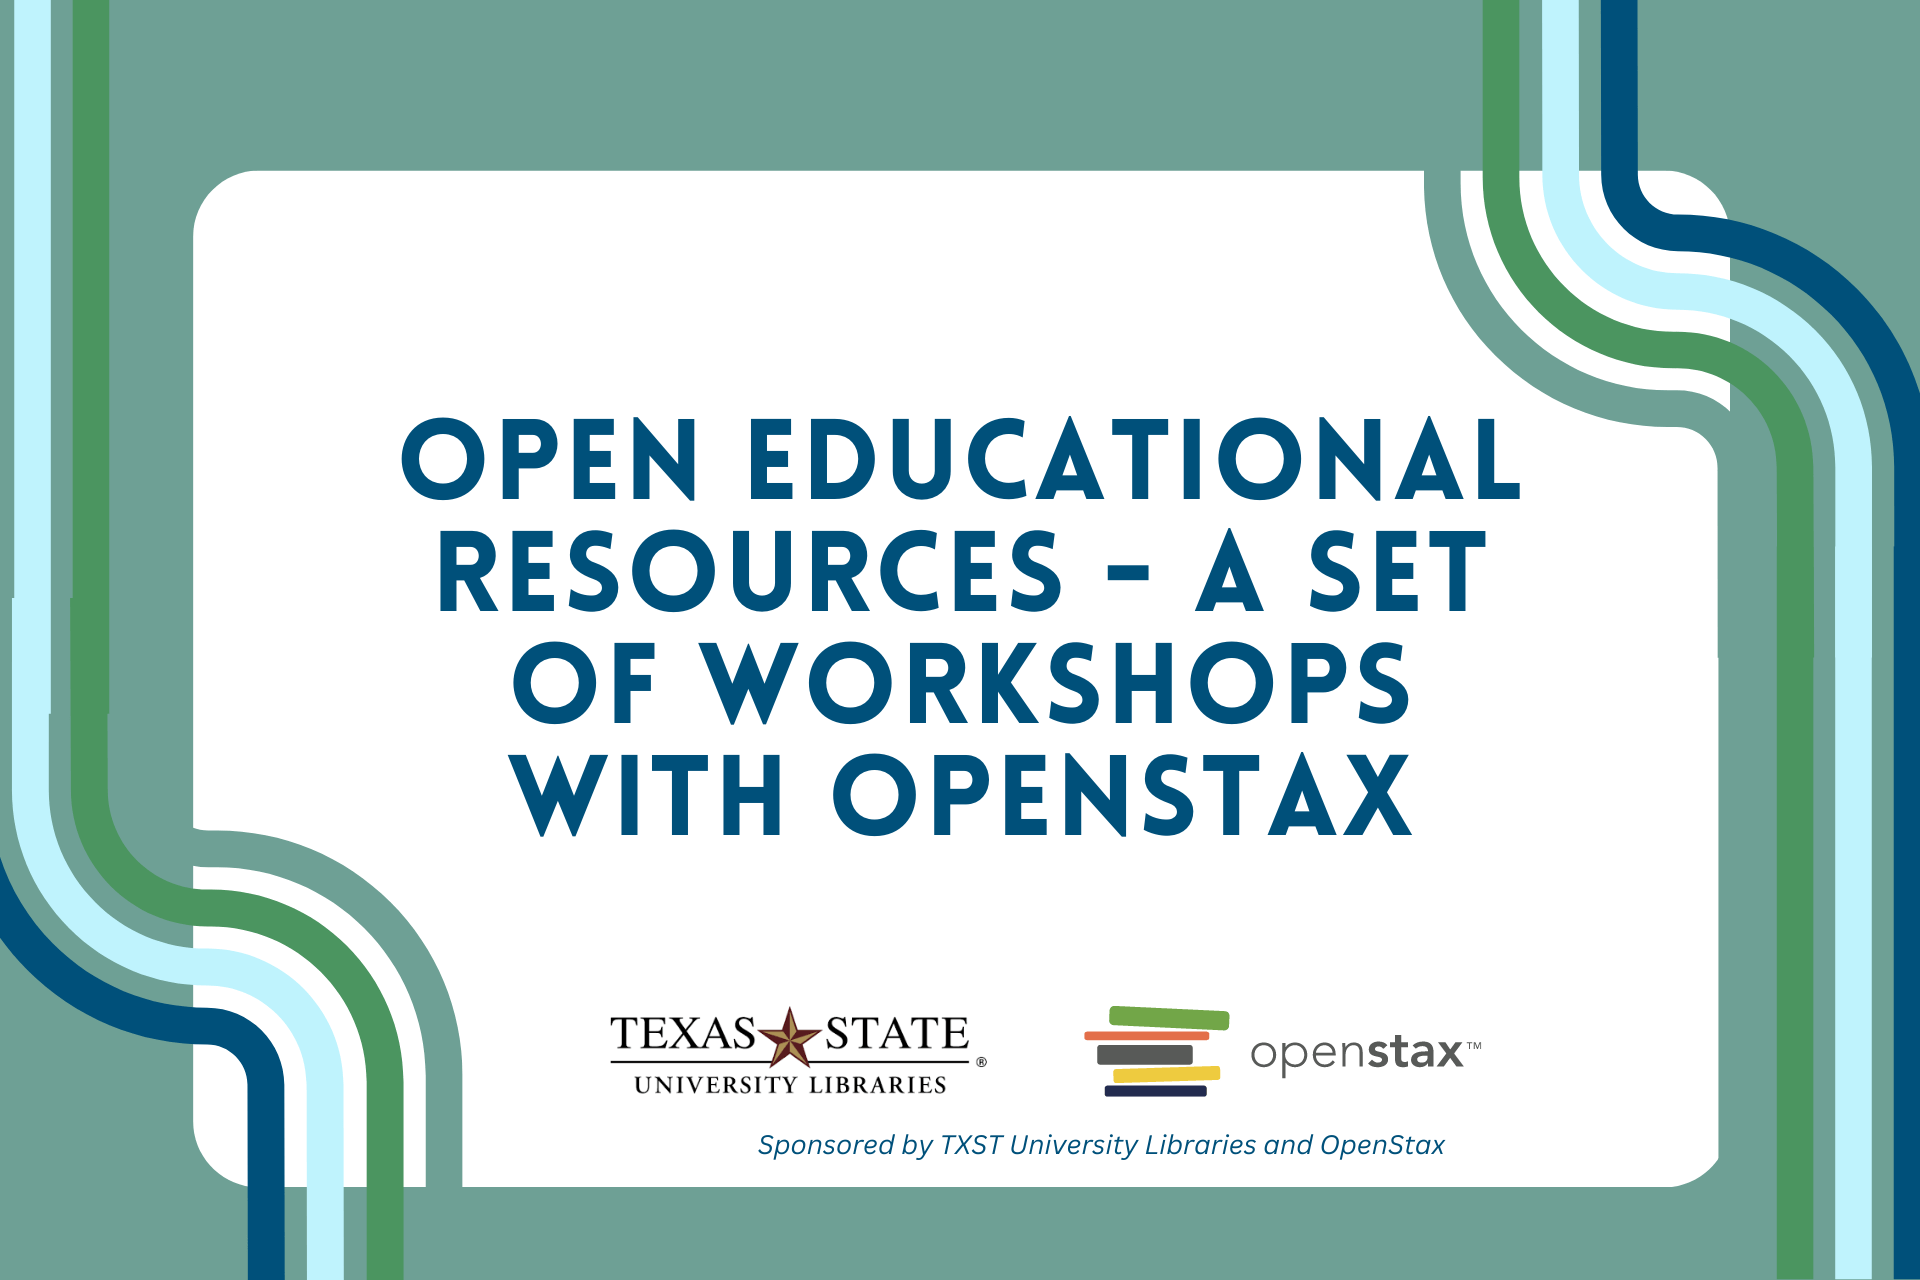 Open Educational Resources - A set of Workshops With OpenStax sponsored by University Libraries and OpenStax